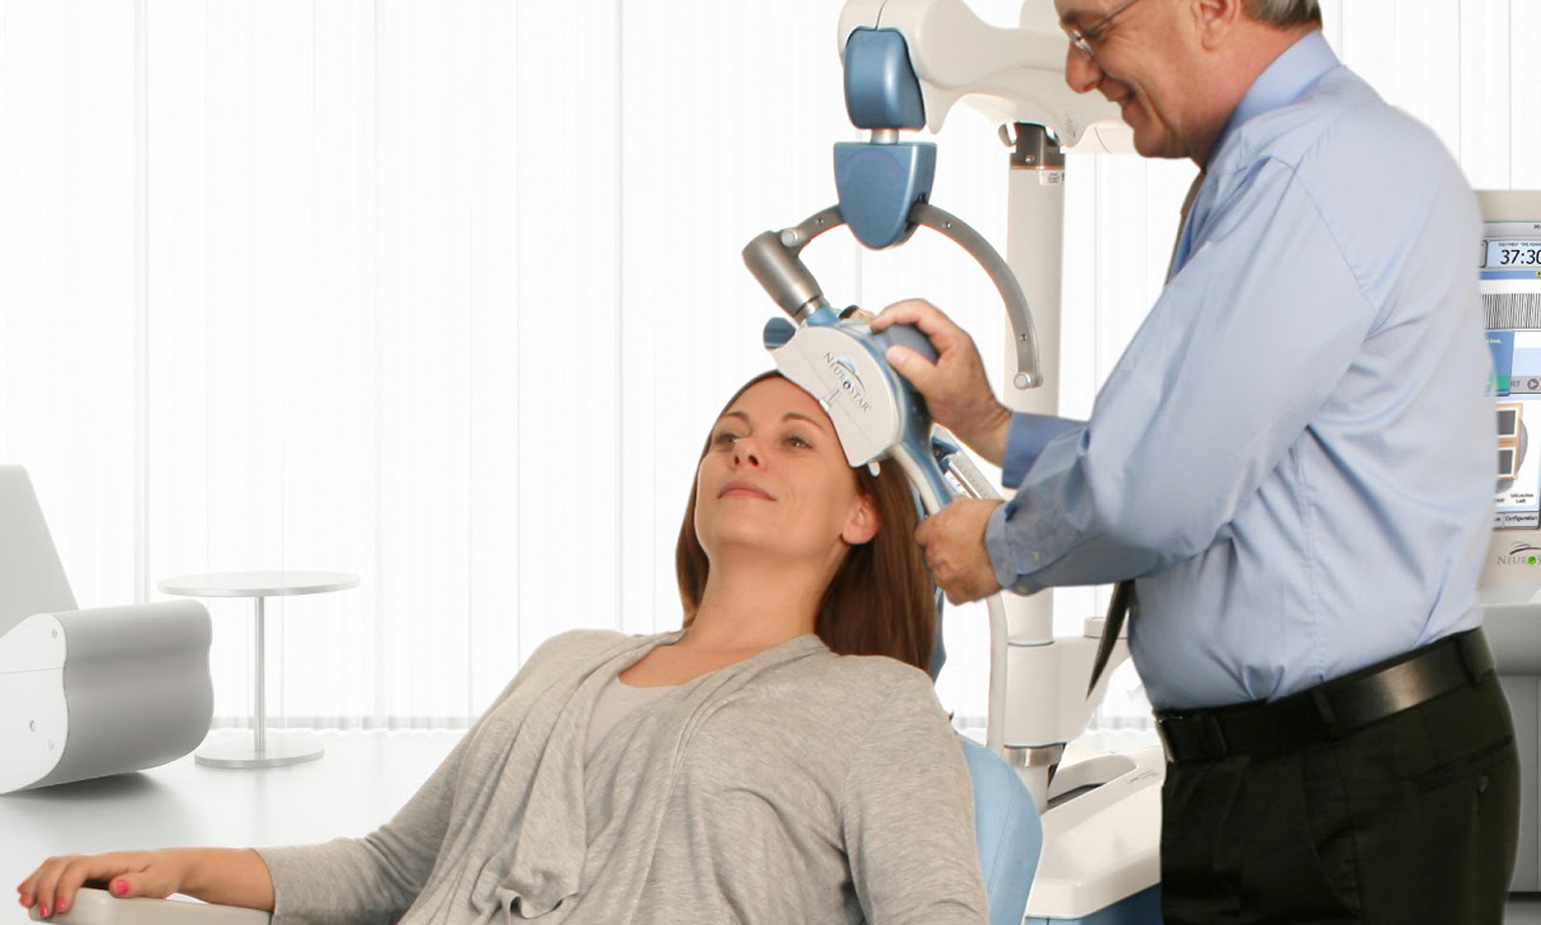 Woman in medical procedure room chair, being prepped for transcranial magnetic stimulation treatment